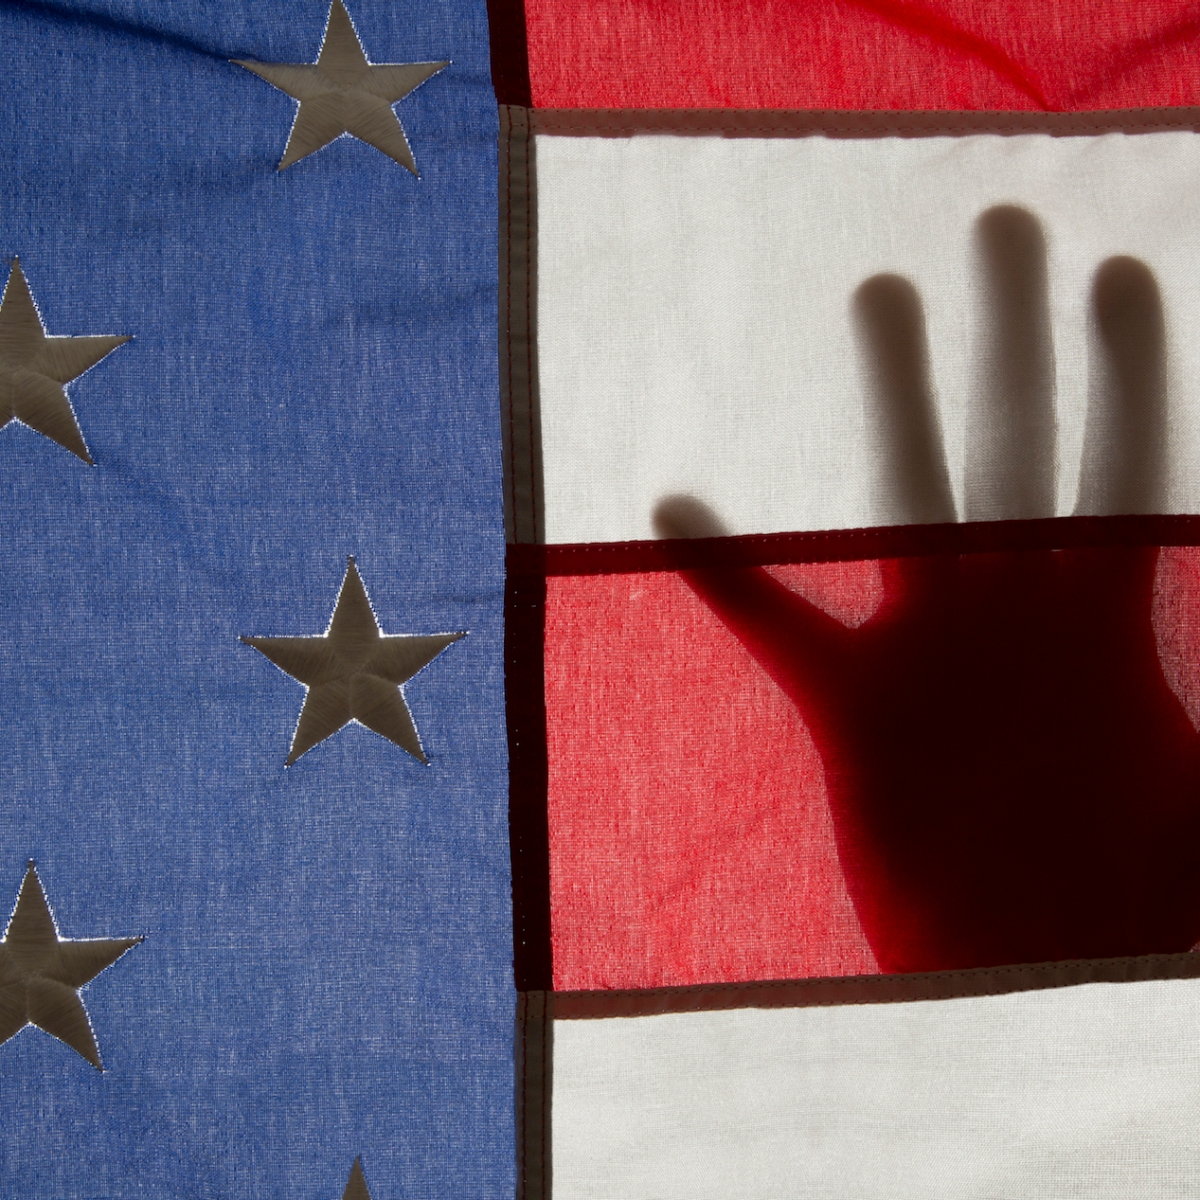 American flag with hand silhouette over red and white stripes